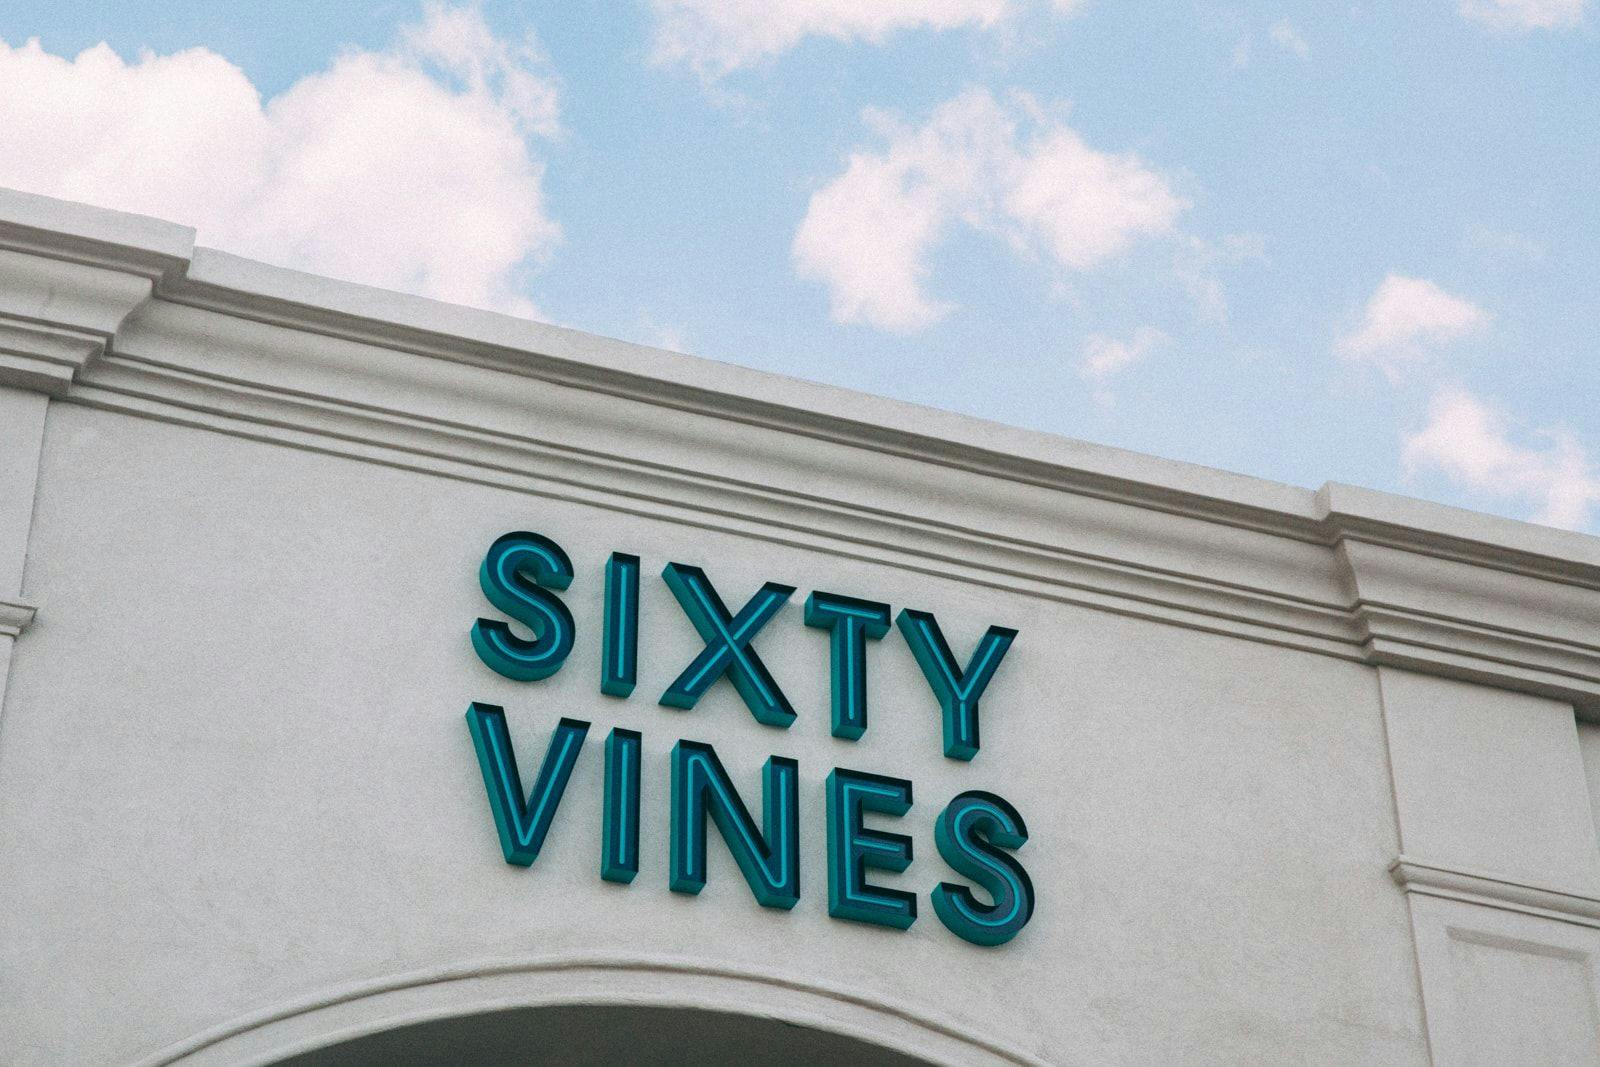 Signage for Sixty Vines on the exterior of the restaurant